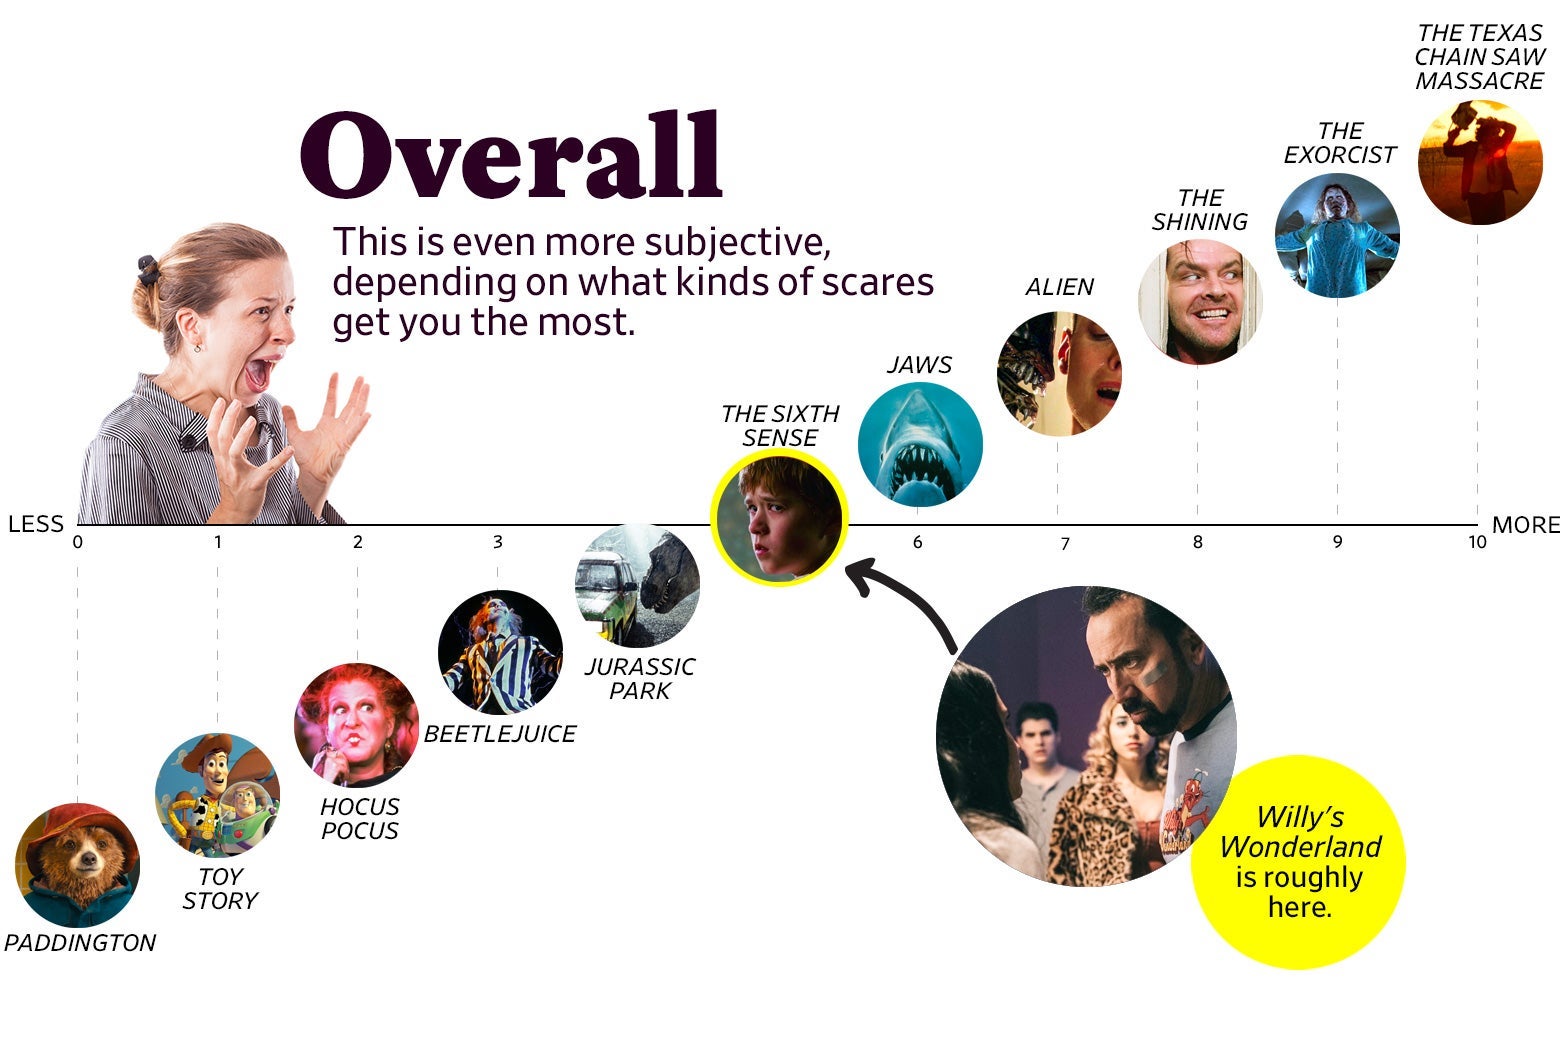 A chart titled “Overall: This is even more subjective, depending on what kinds of scares get you the most” shows that Saint Maud ranks as a 5, roughly the same as The Sixth Sense. The scale ranges from Paddington (0) to the original Texas Chain Saw Massacre (10)